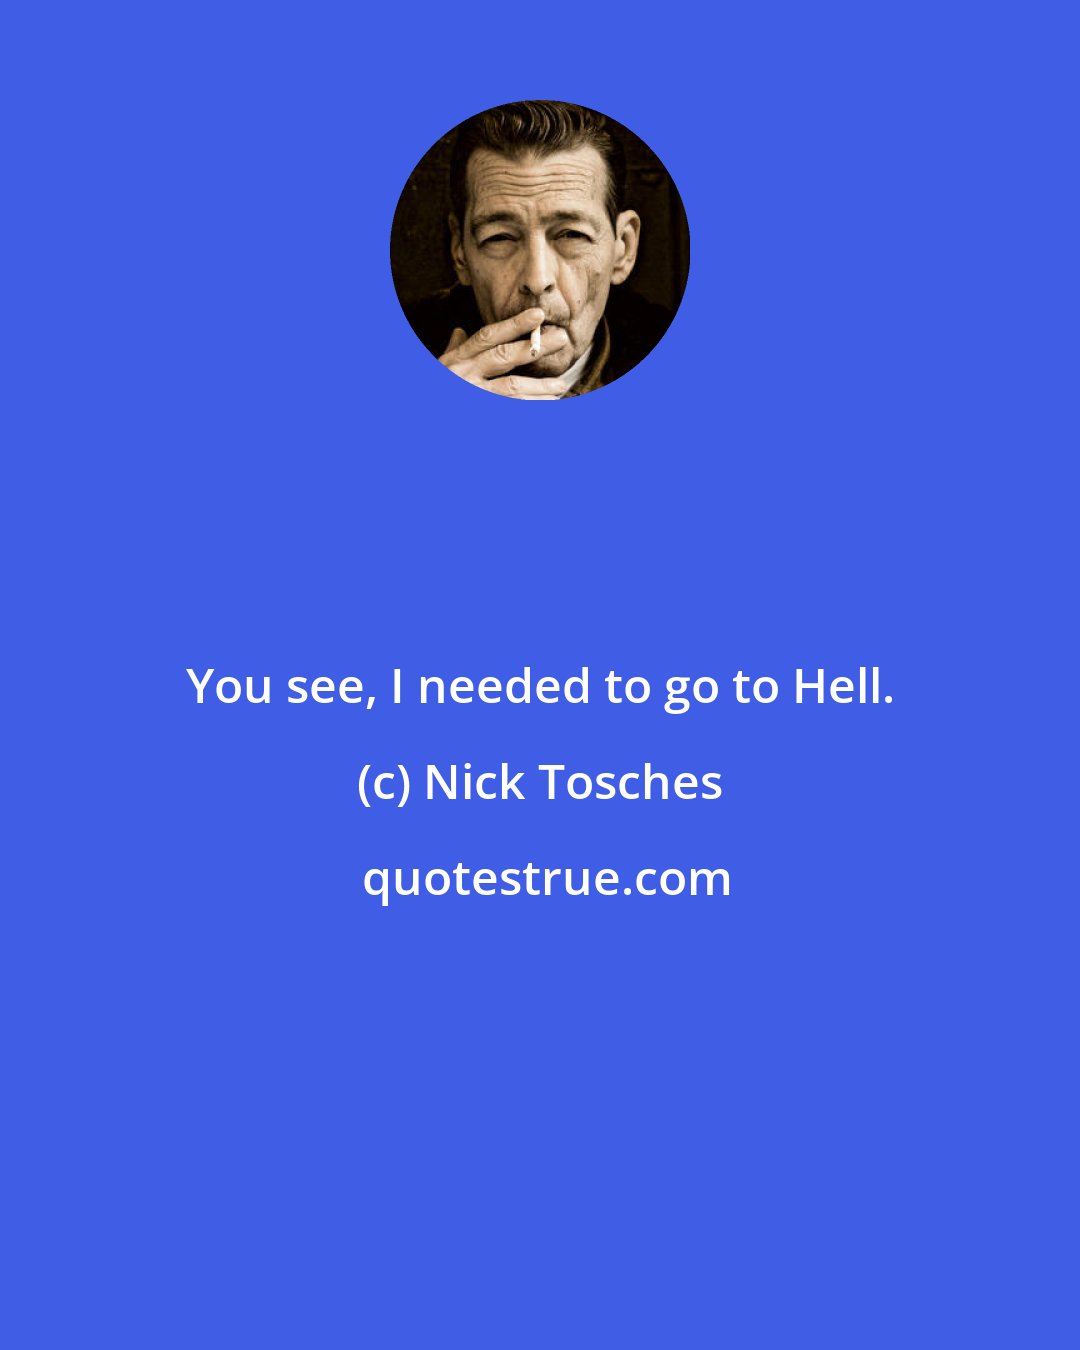 Nick Tosches: You see, I needed to go to Hell.